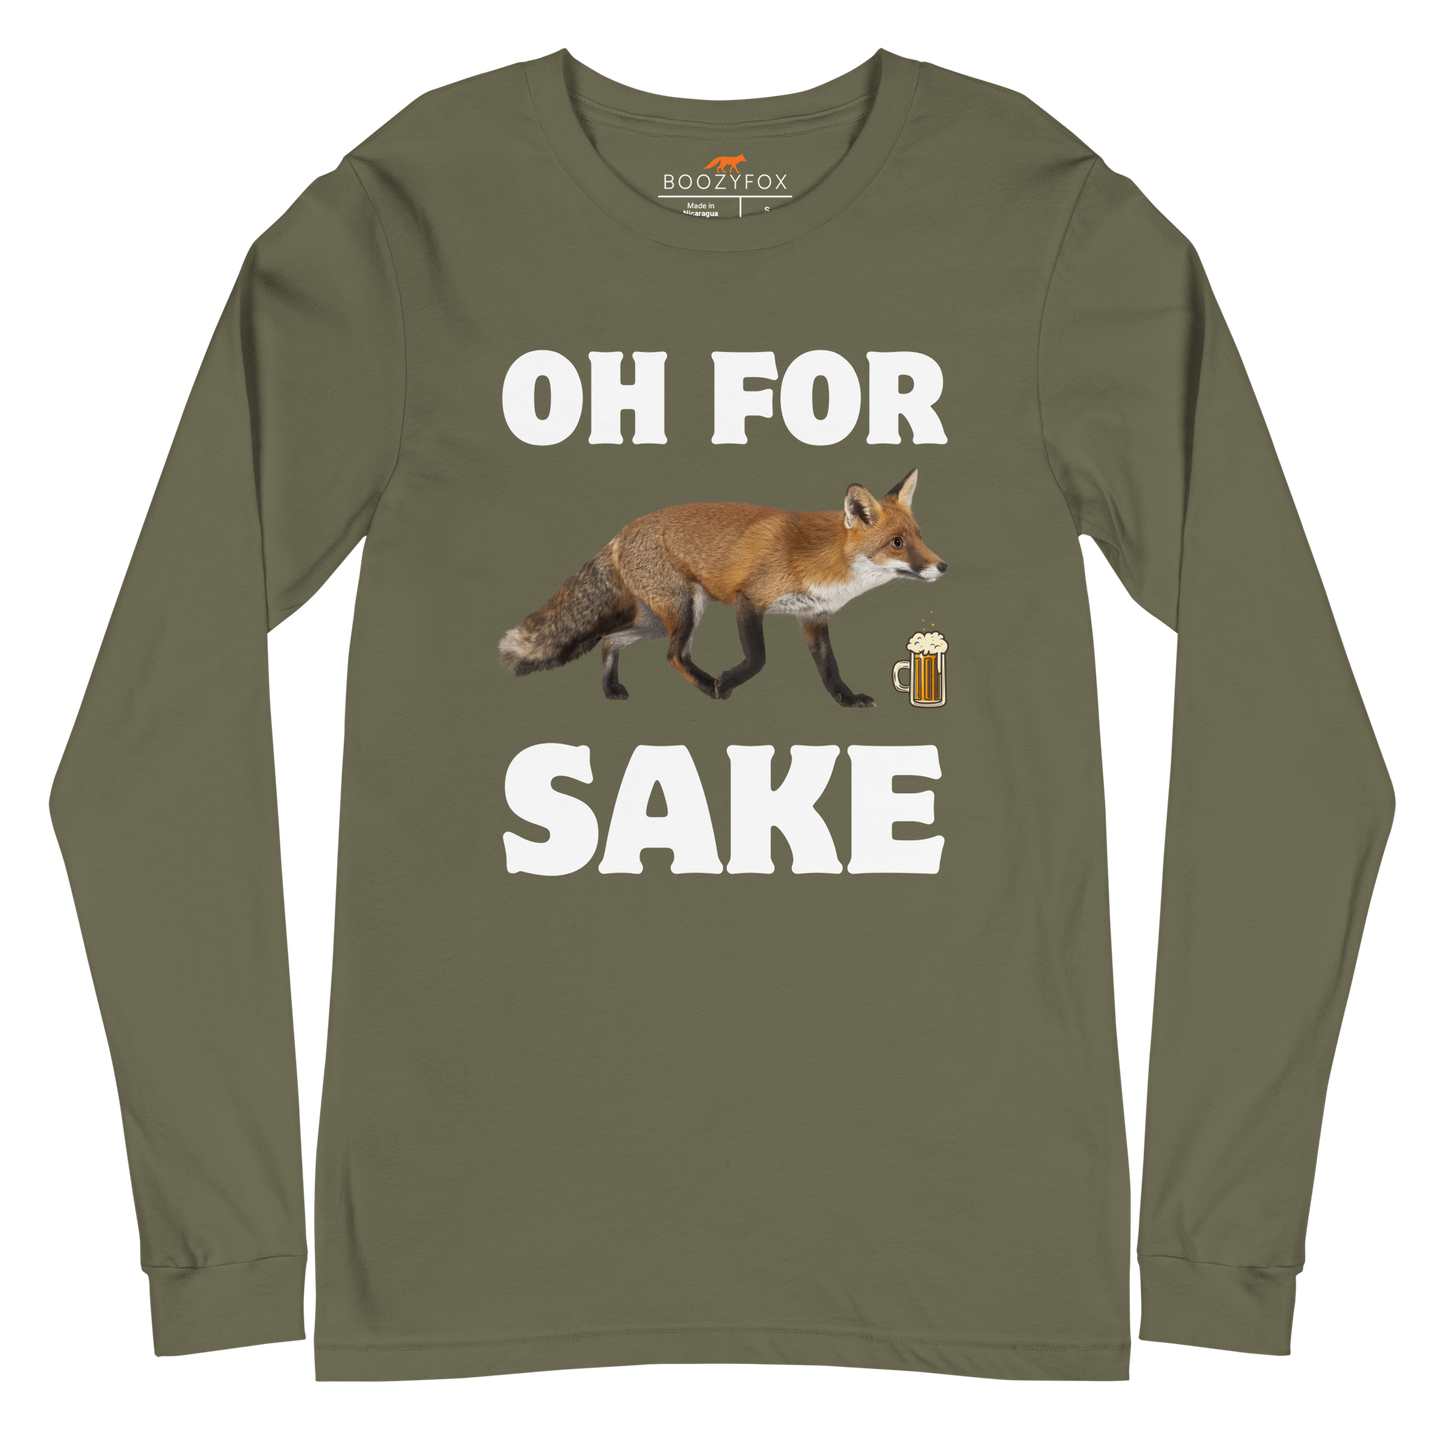 Military Green Fox Long Sleeve Tee featuring a Oh For Fox Sake graphic on the chest - Funny Fox Long Sleeve Graphic Tees - Boozy Fox